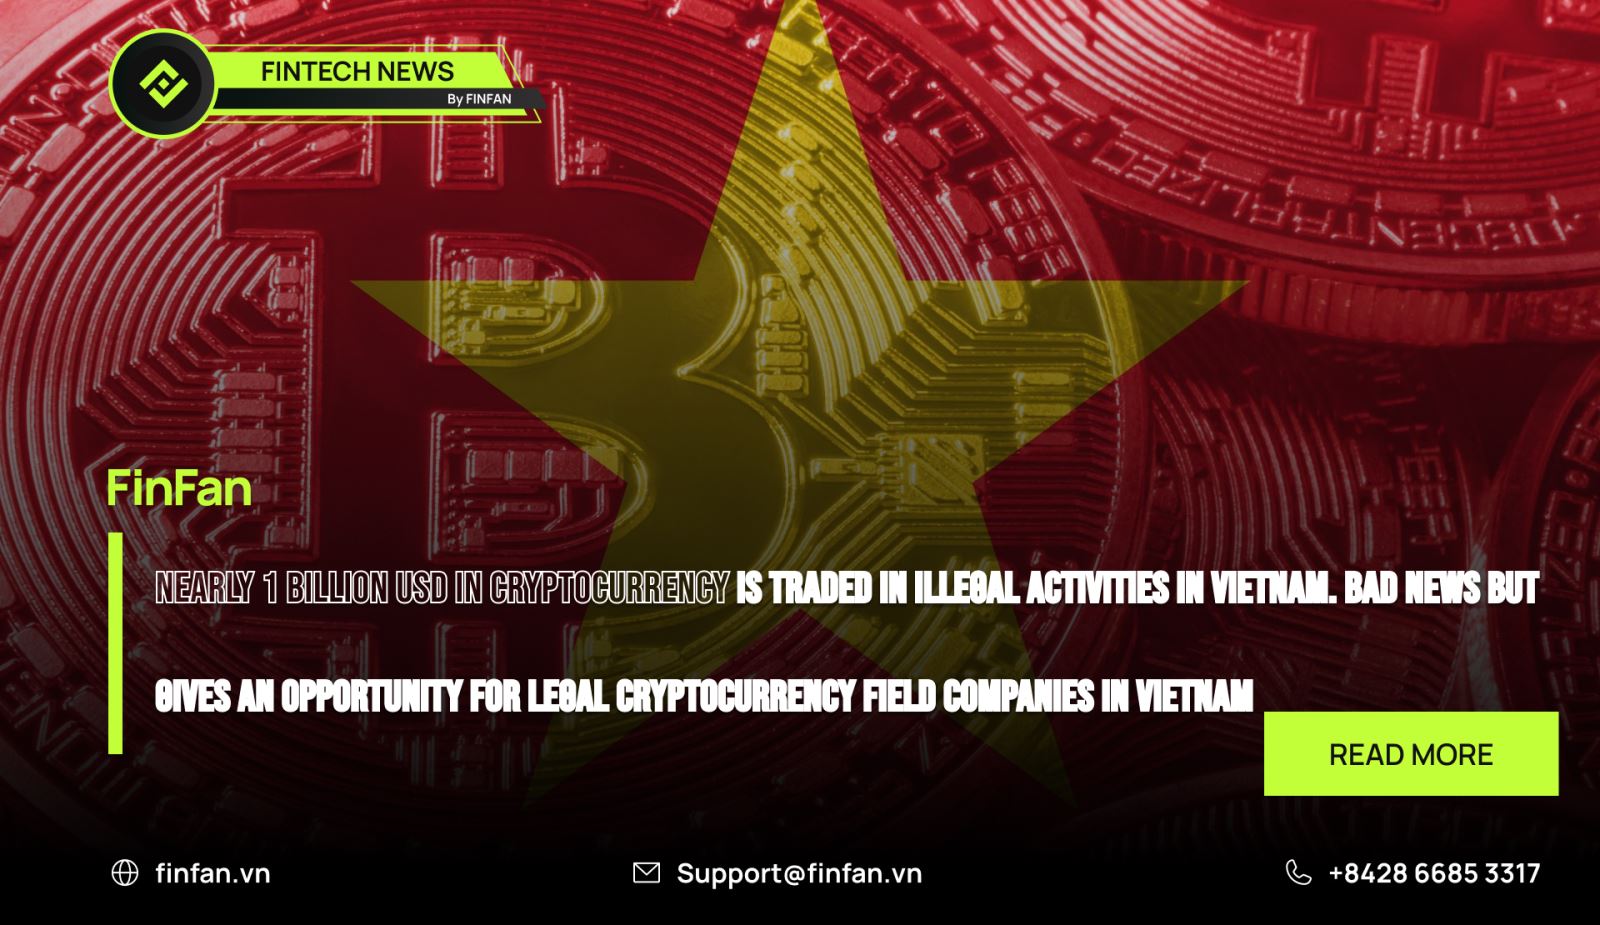 Nearly 1 billion USD in cryptocurrency is traded in illegal activities in Vietnam. Bad news but gives an opportunity for legal cryptocurrency field companies in Vietnam